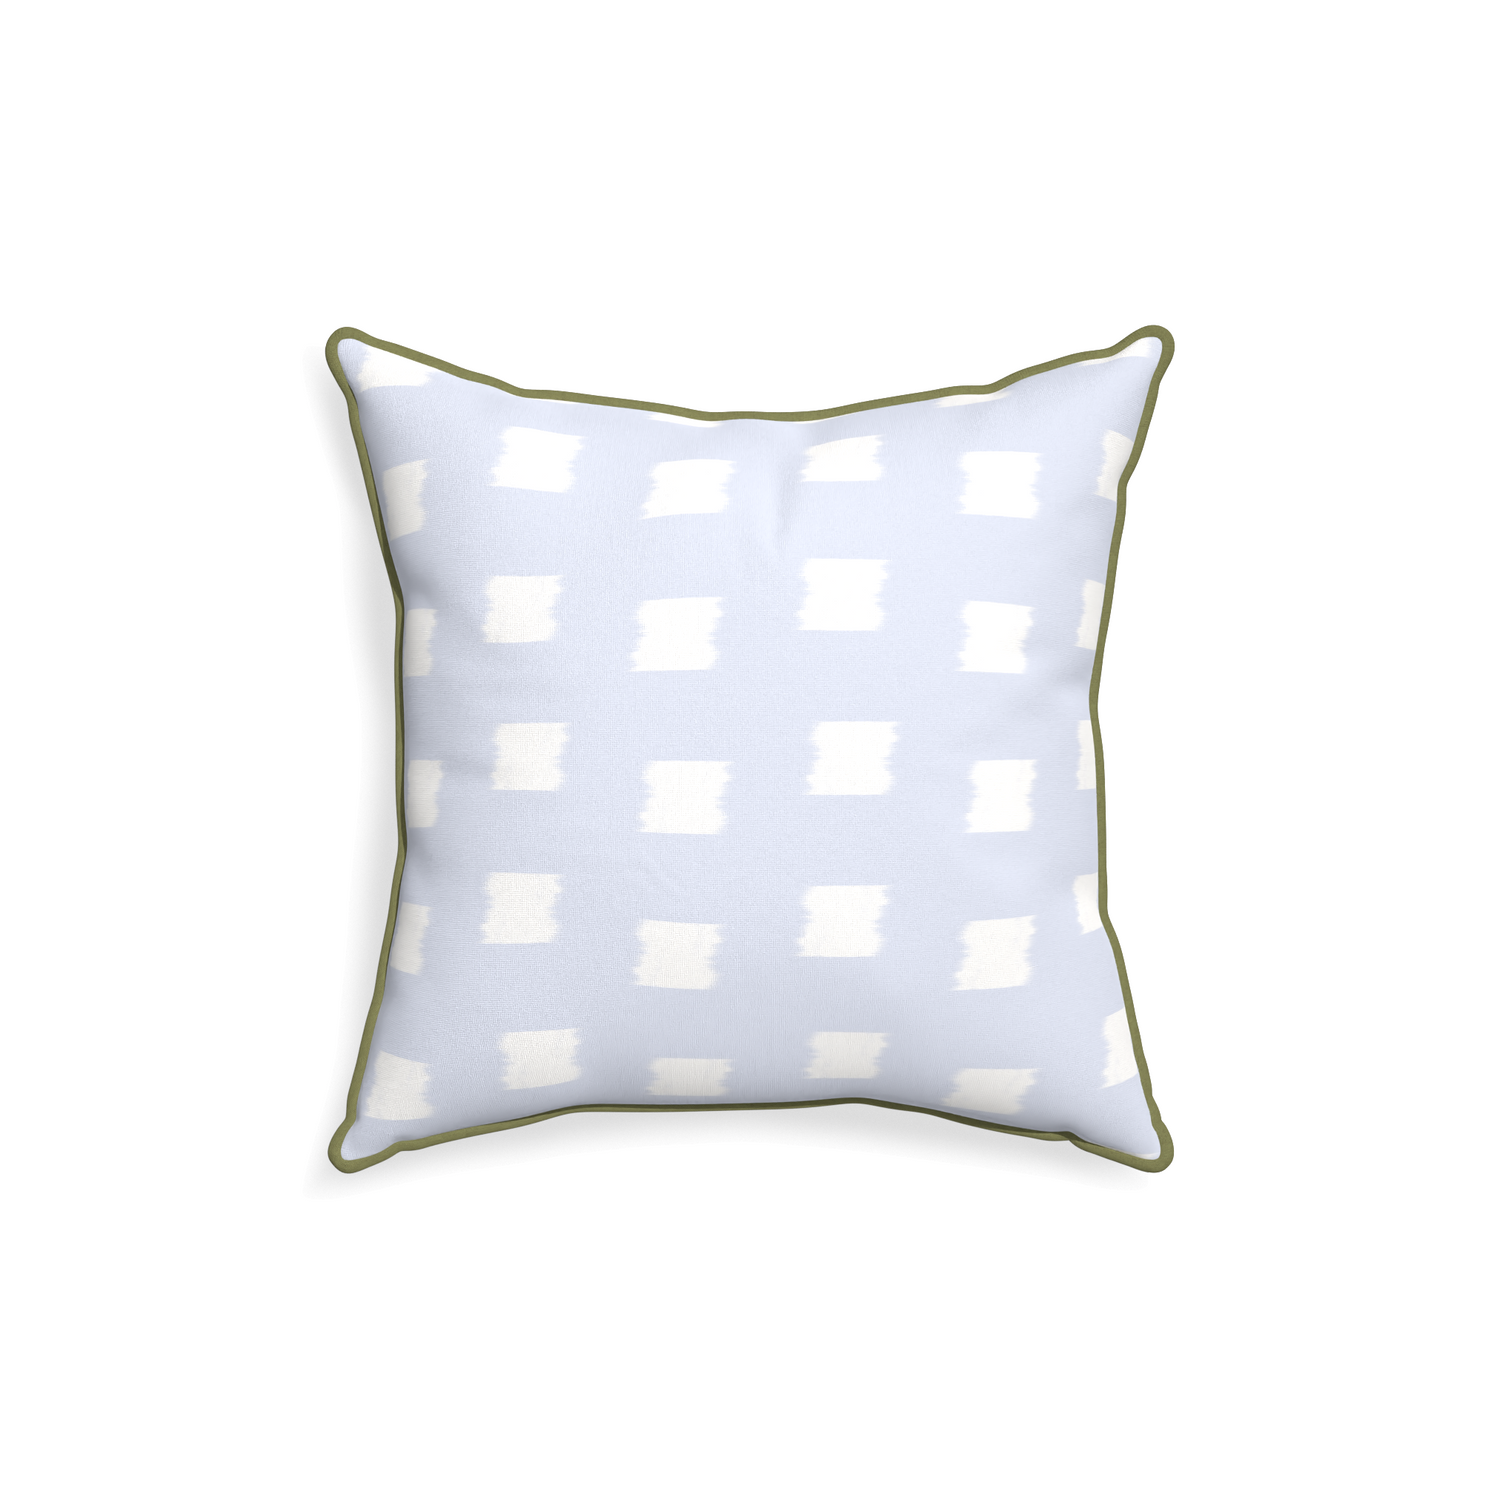 18-square denton custom pillow with moss piping on white background